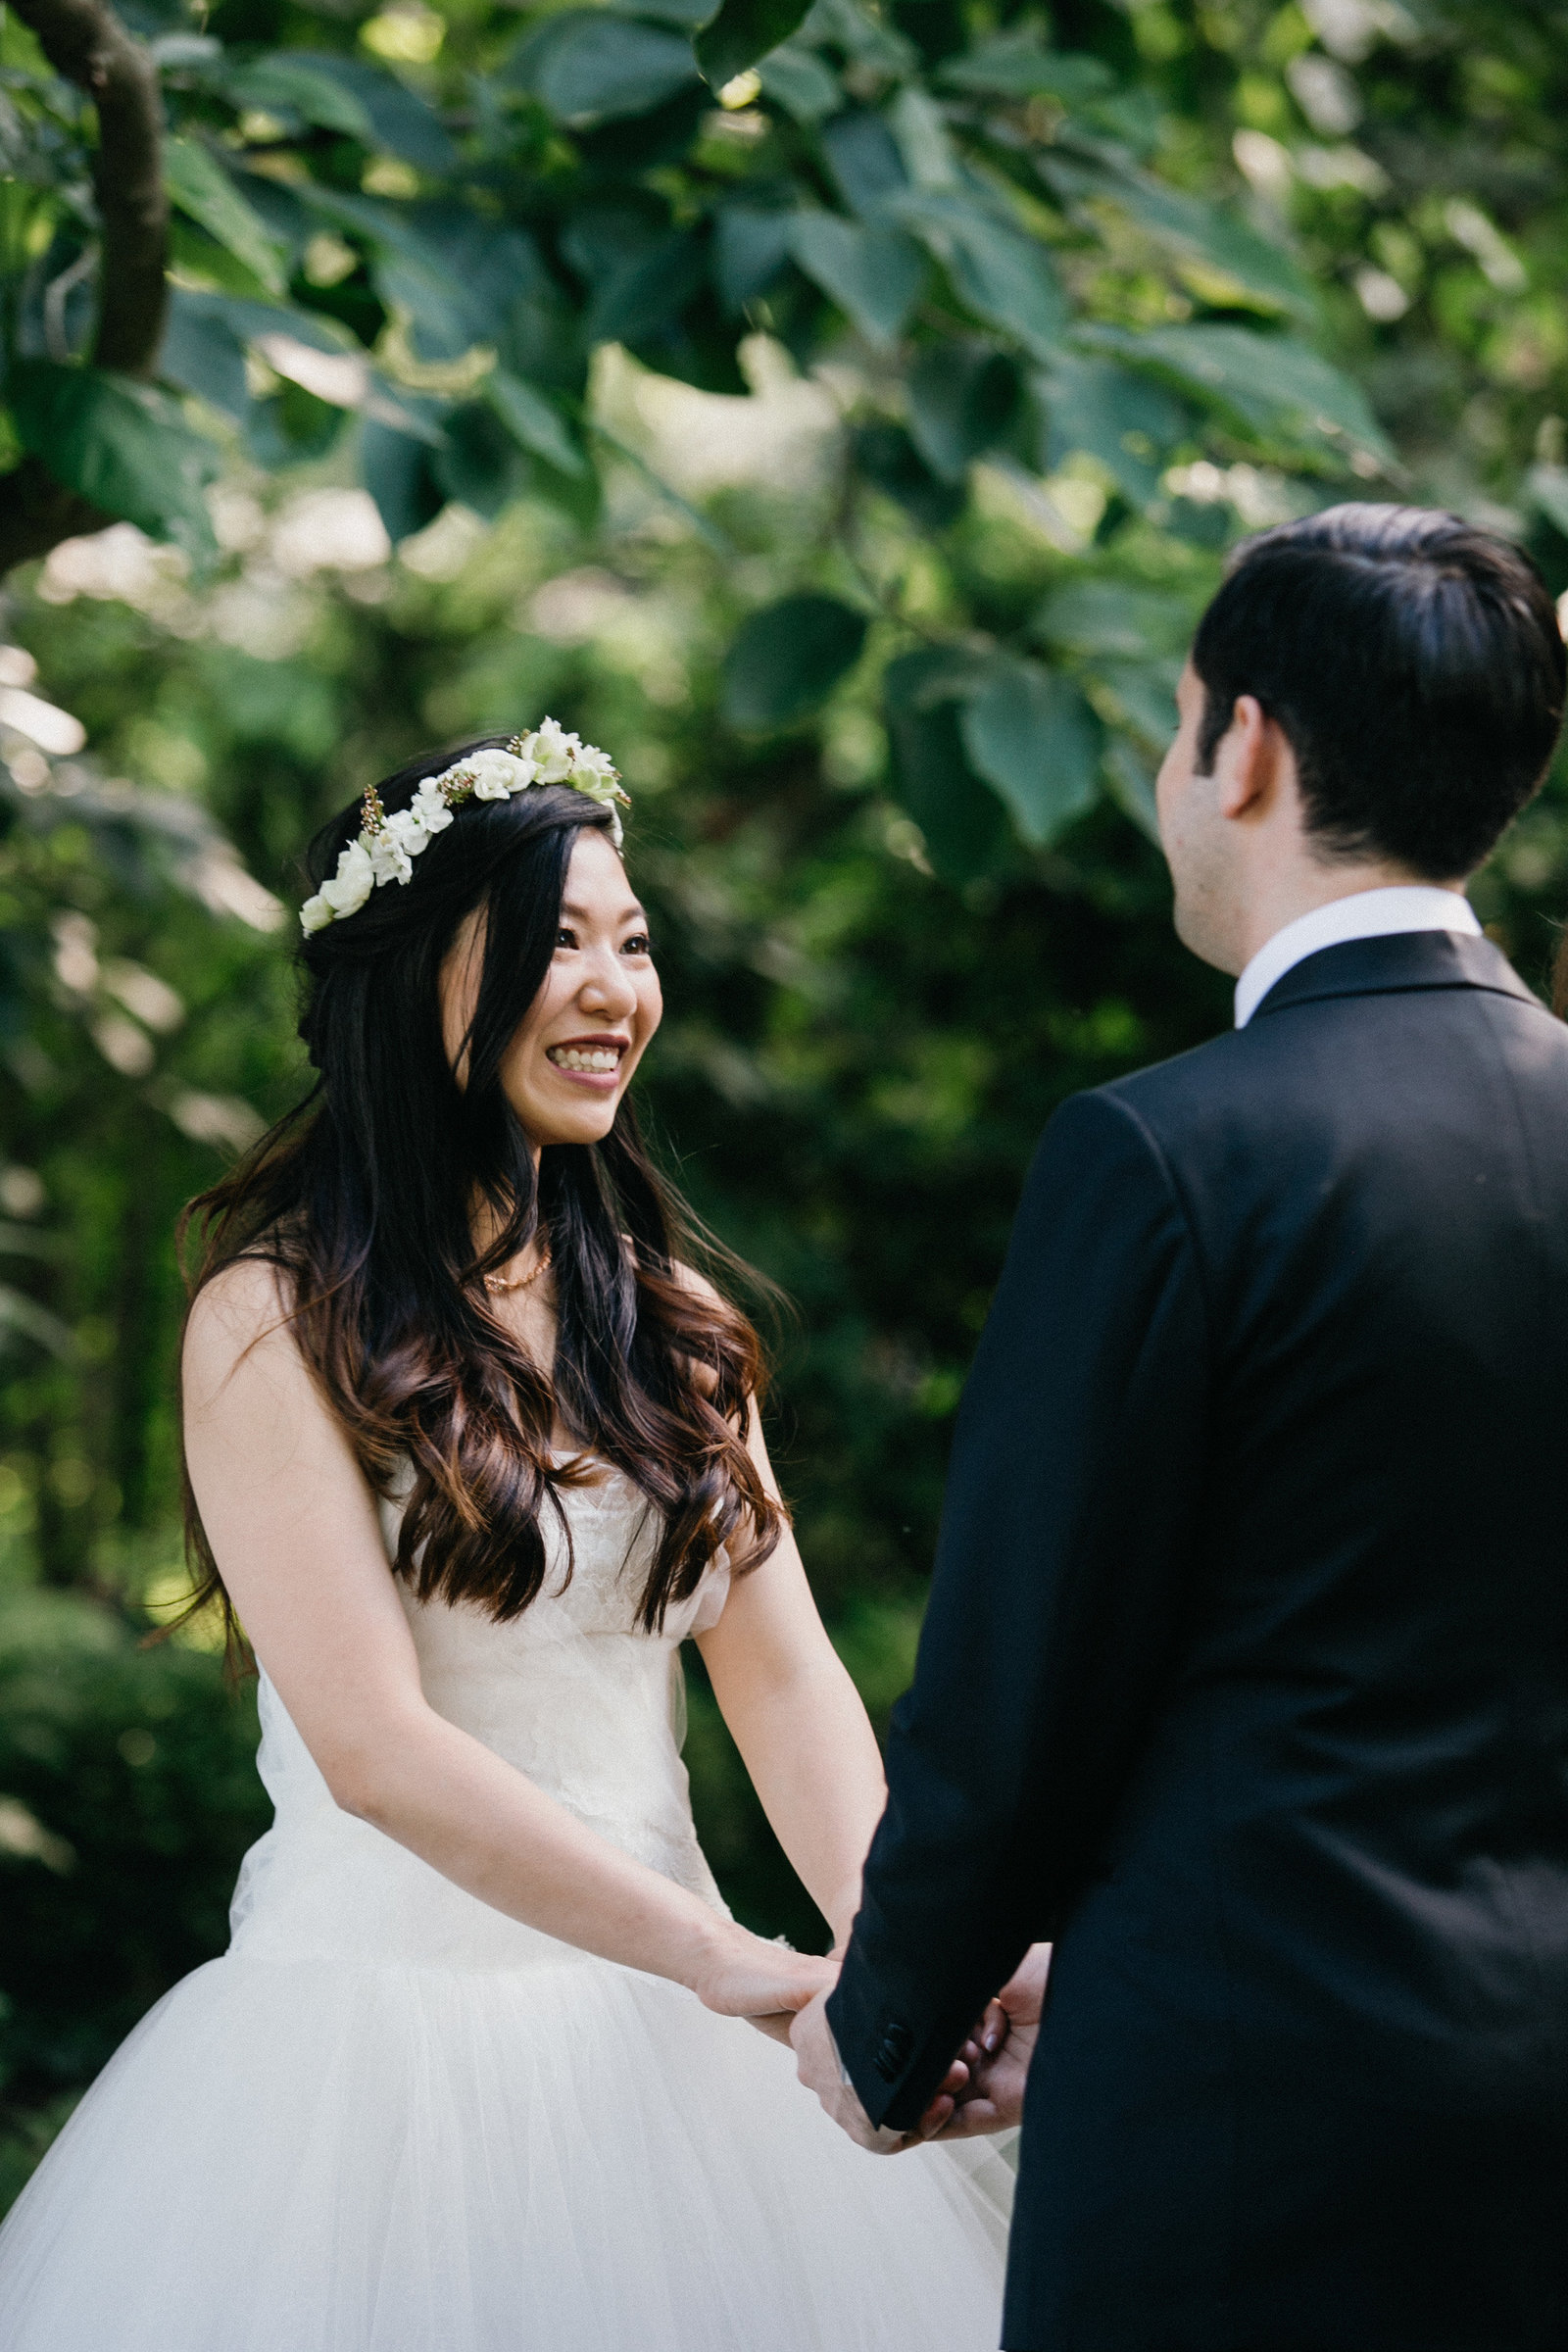 Bride can't stop smiling during the ceremony at this Fernbrook Farm wedding venue.